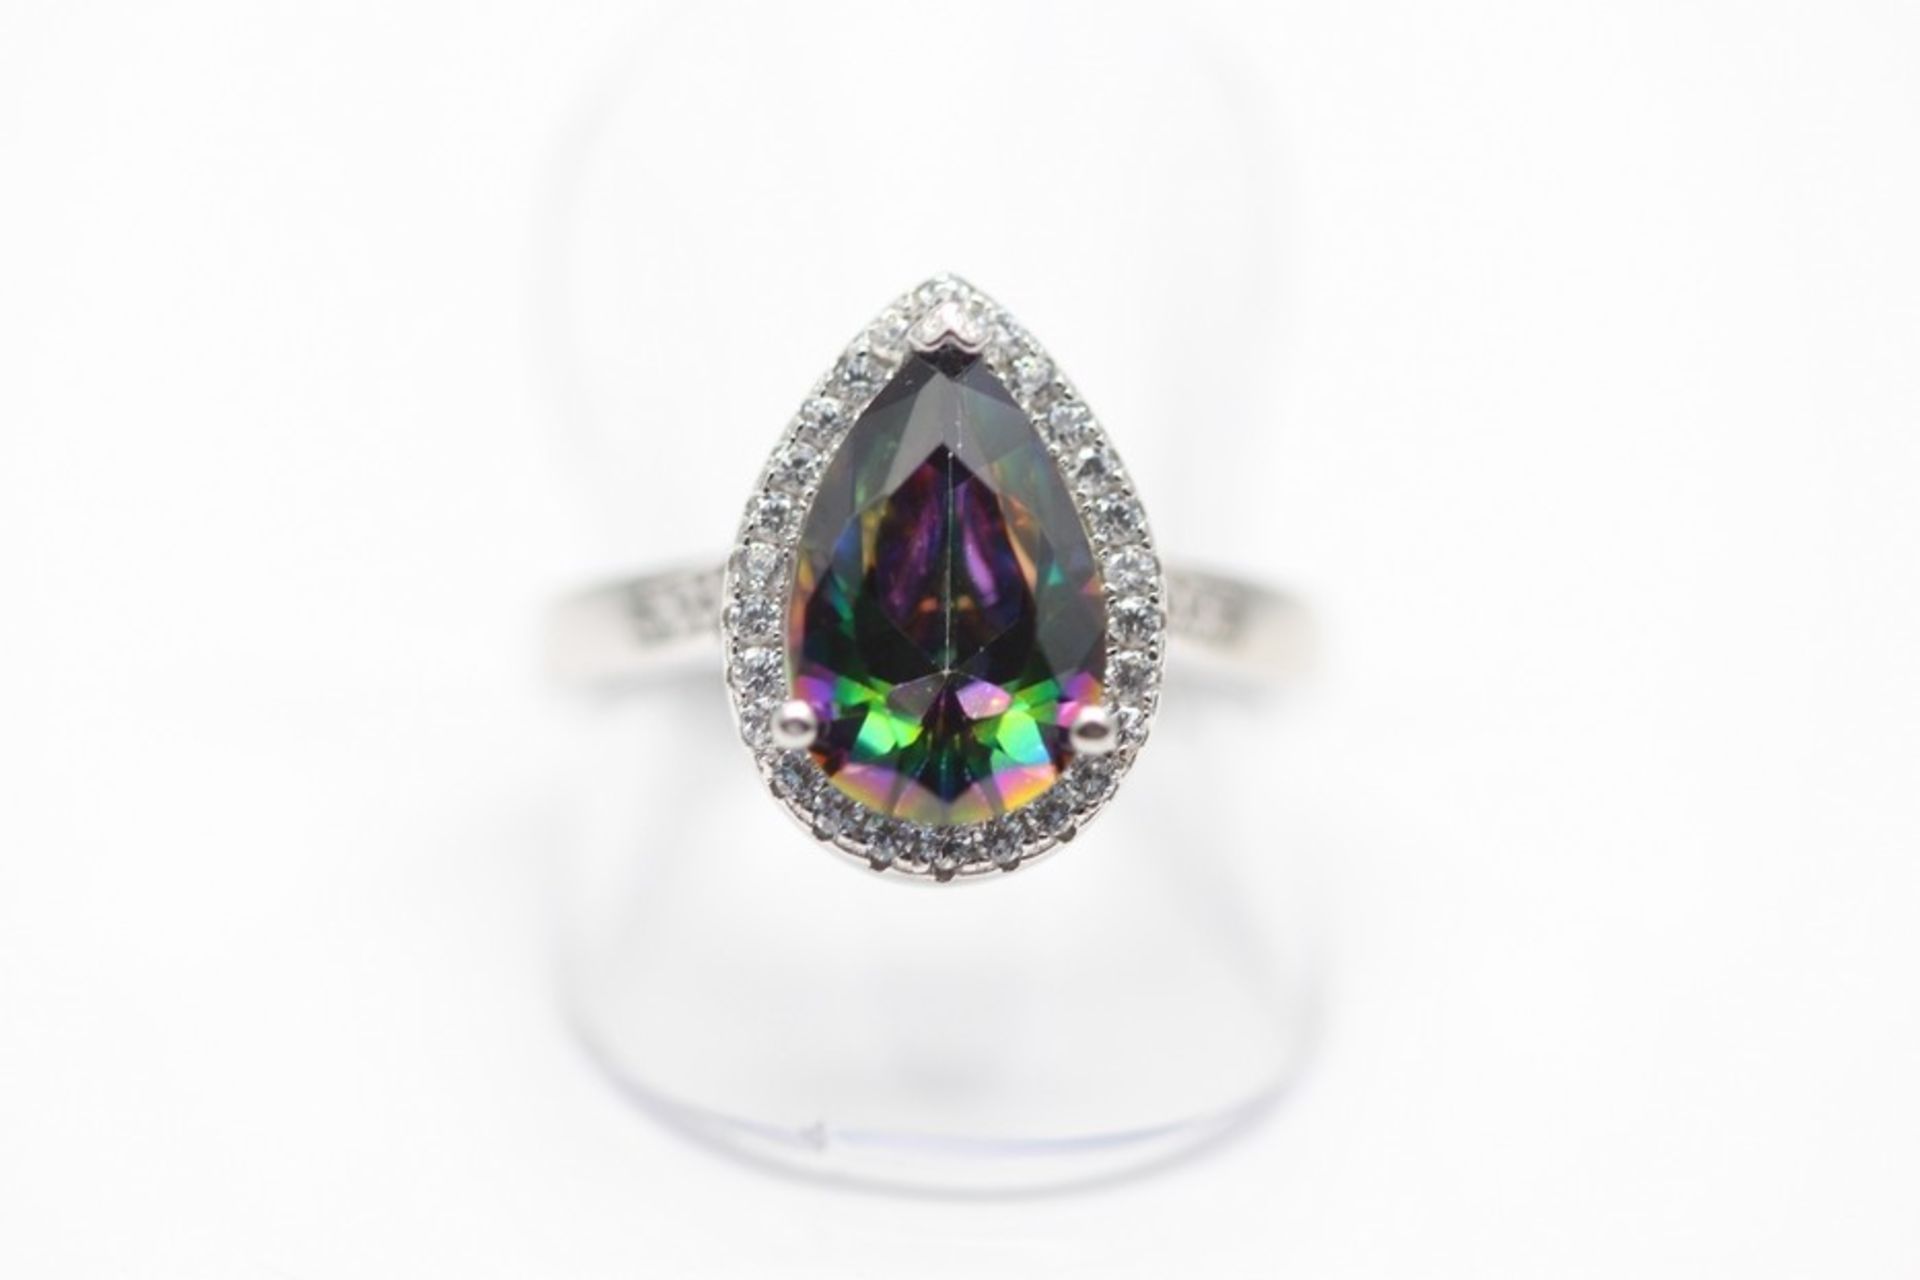 1 x BOXED BRAND NEW SOLID SILVER LADIES RING SET WITH A PEAR SHAPED MYSTIC TOPAZ CENTRE STONE